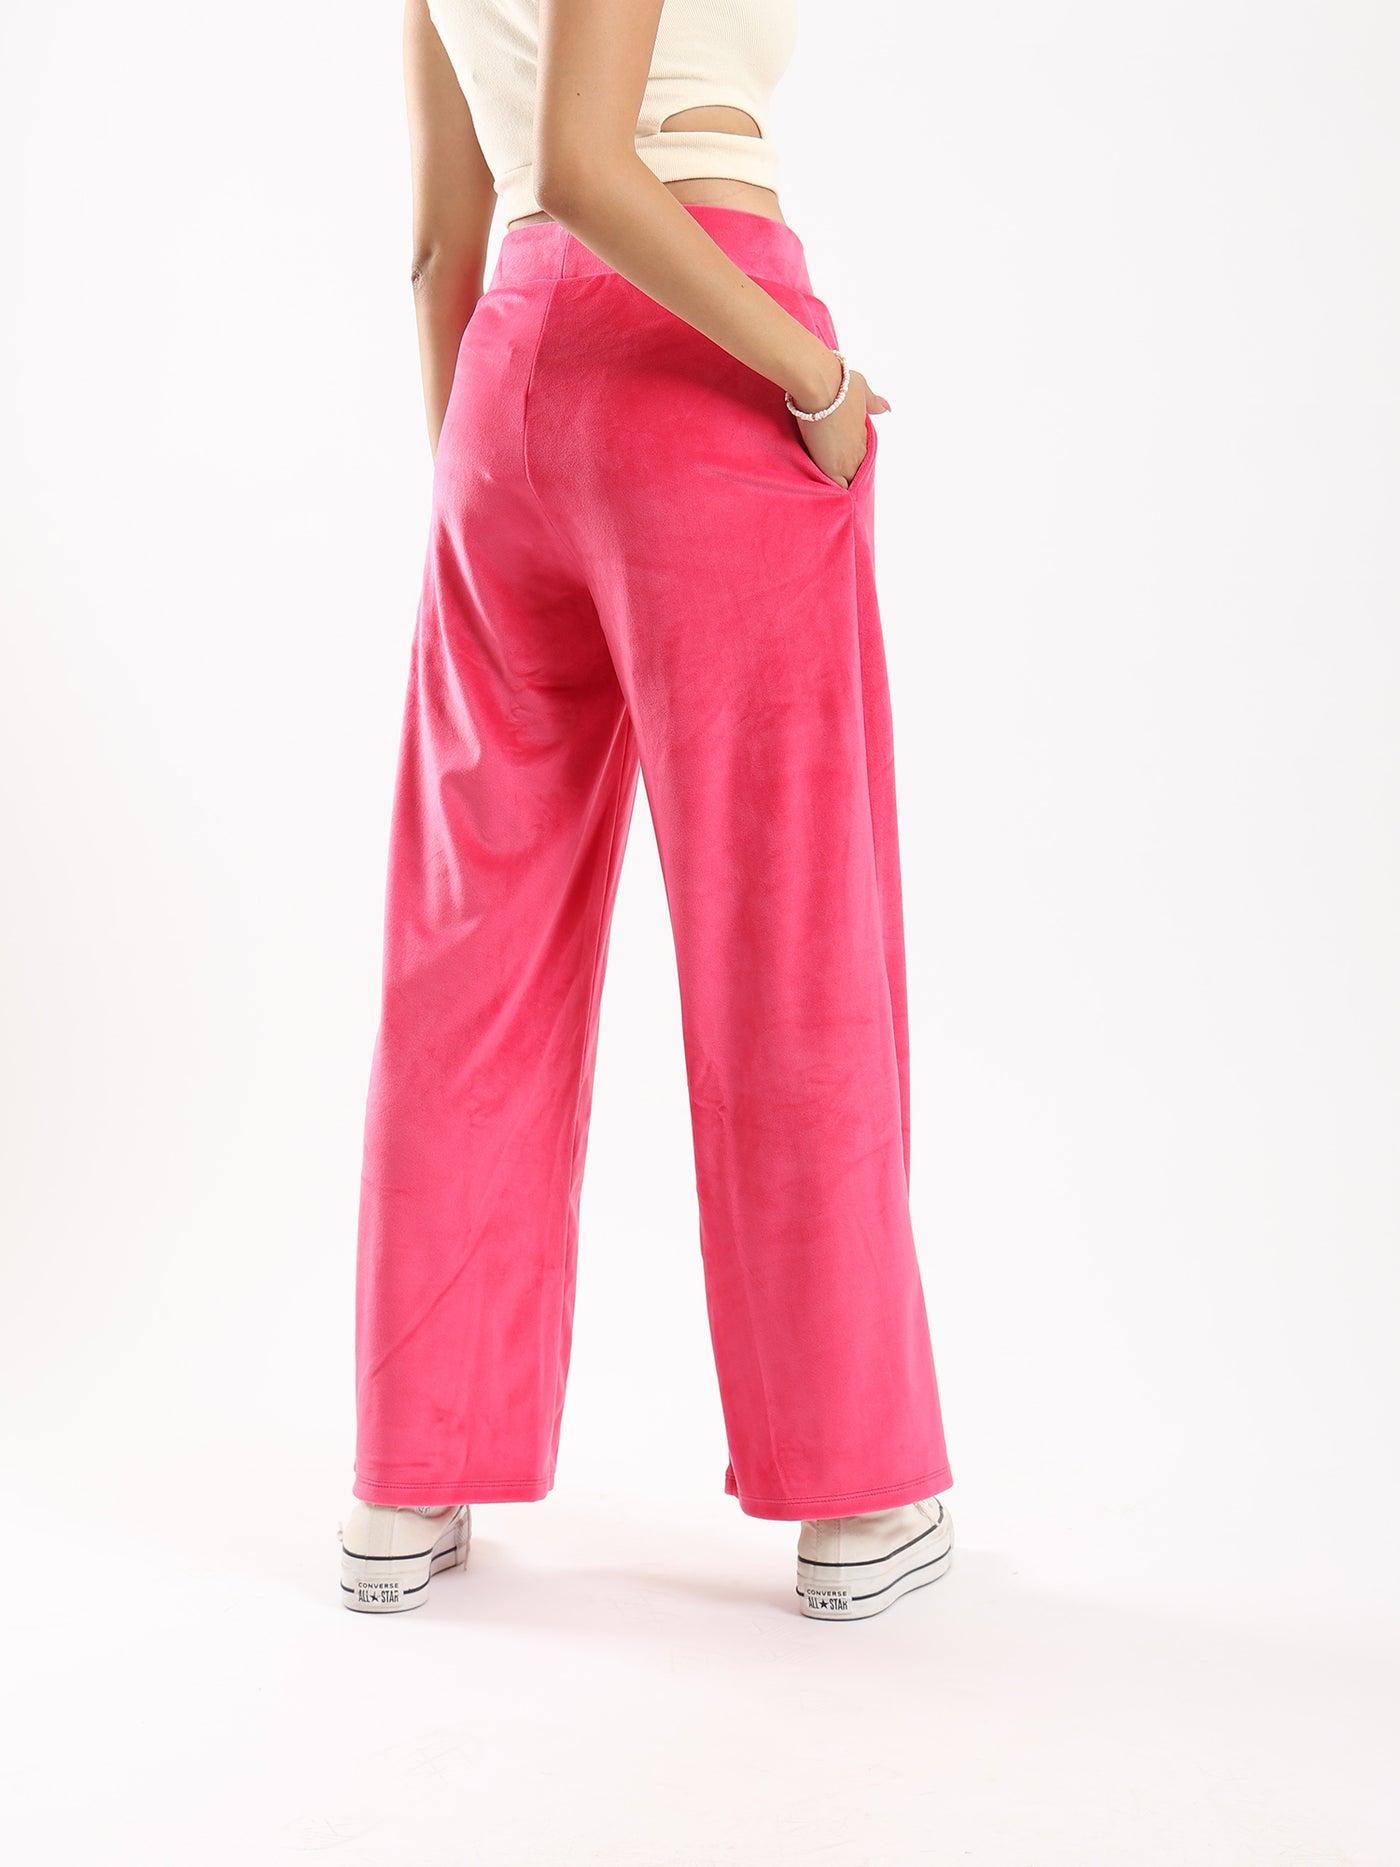 Pants - Wide Leg - With Pockets